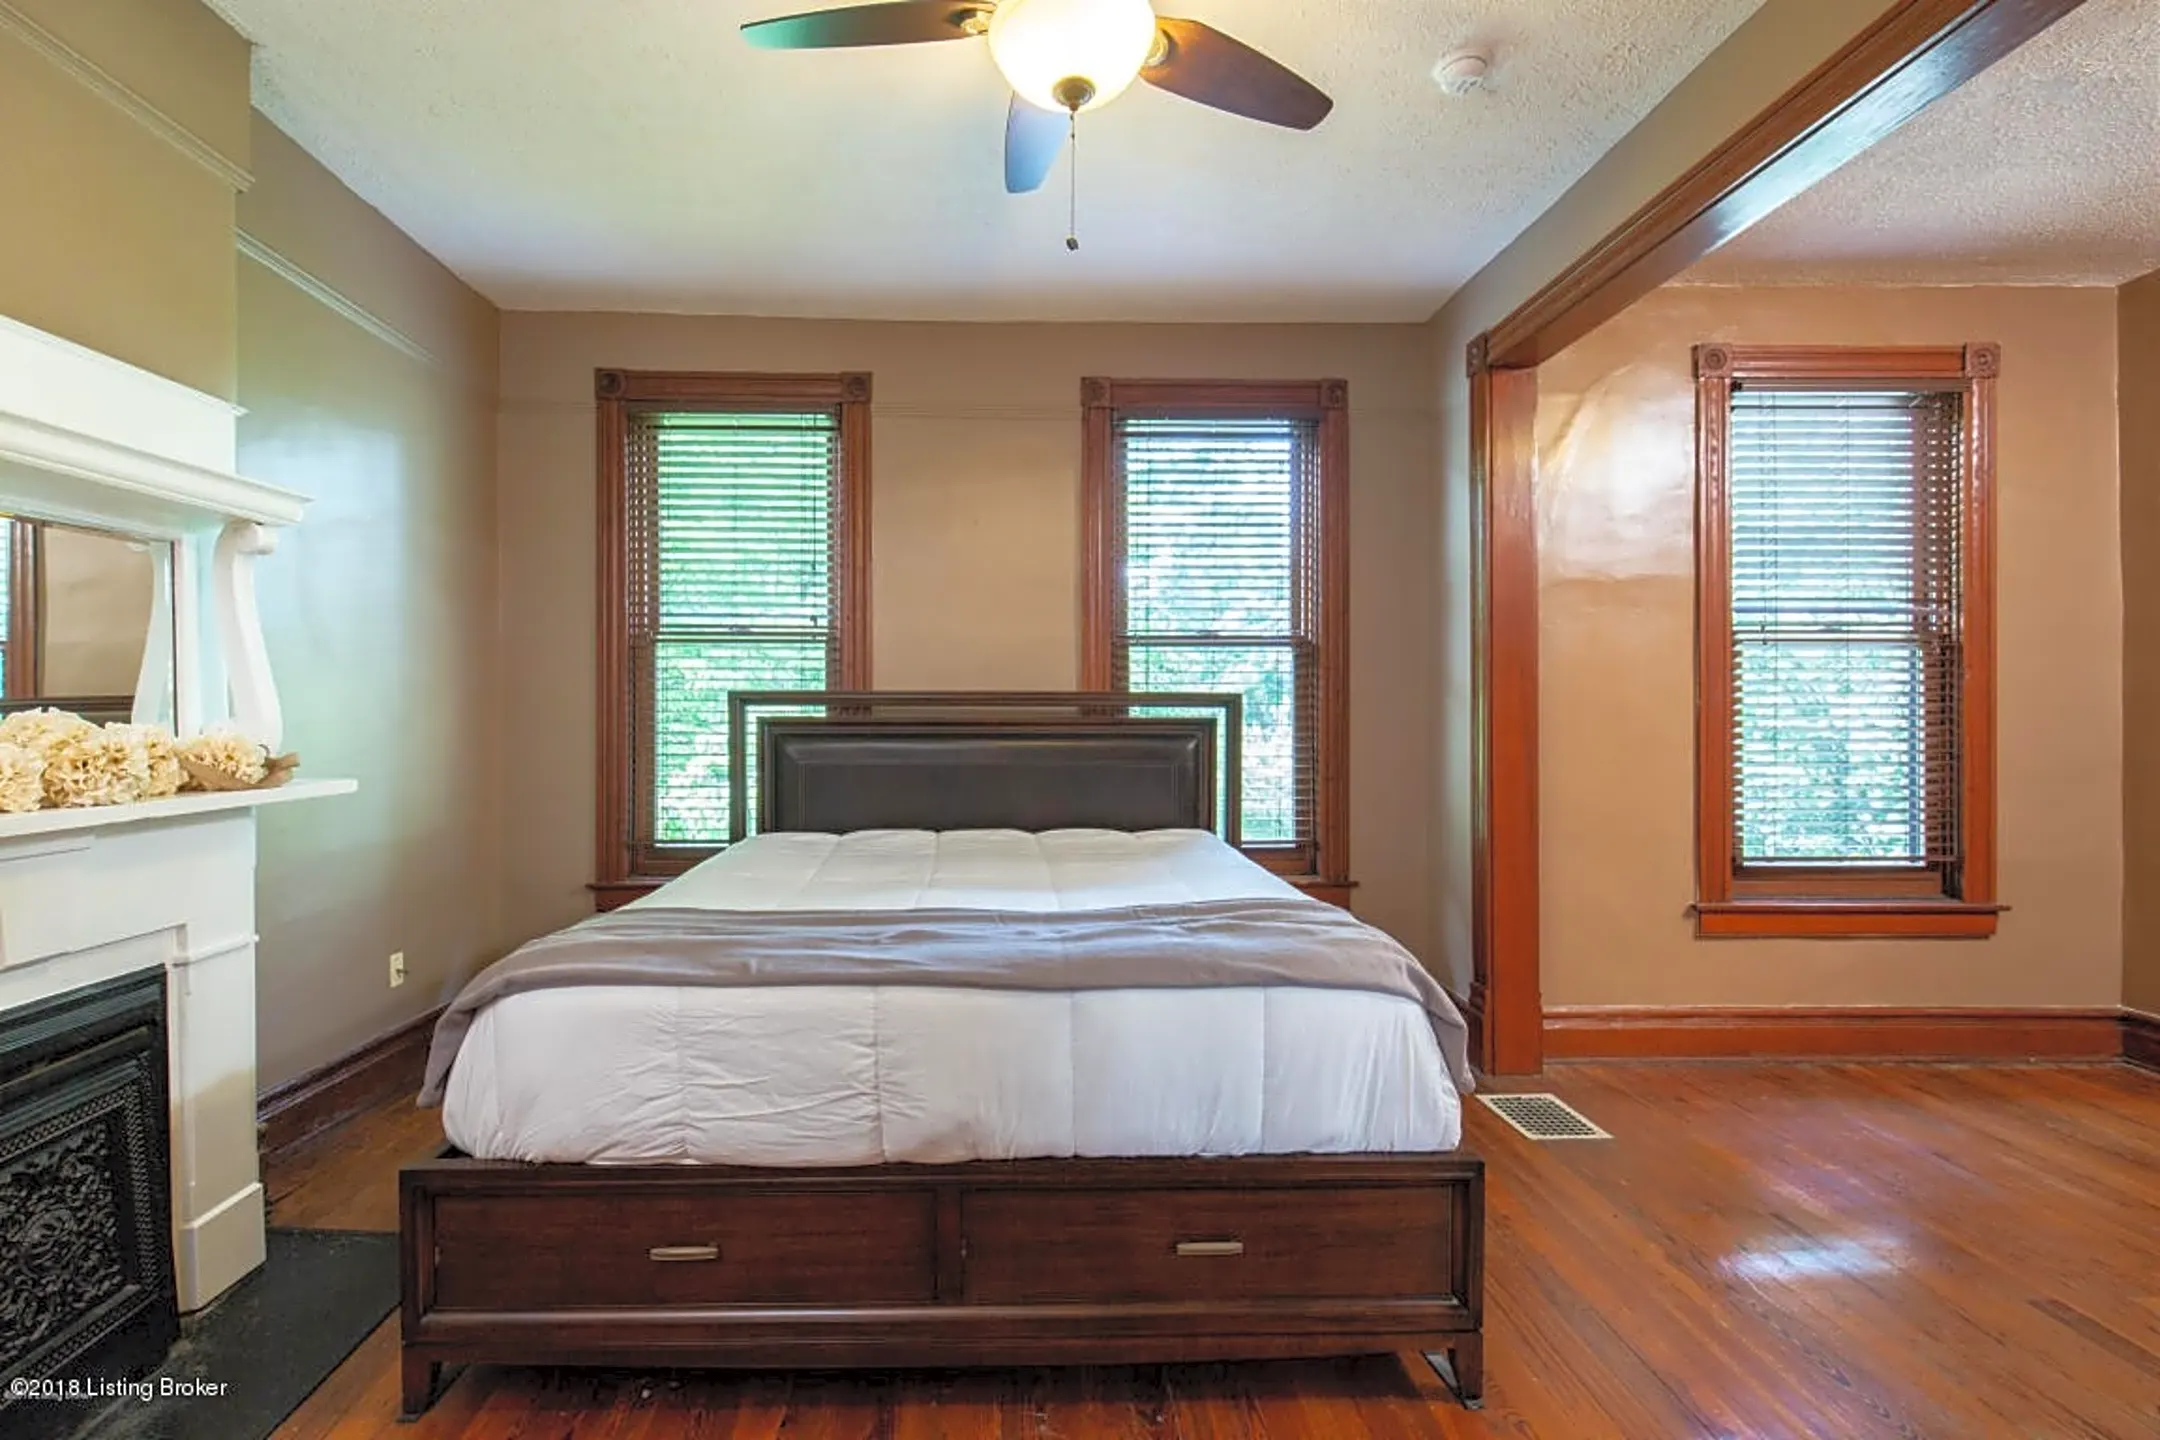 Bedroom - 1328 Highland Ave - Louisville, KY